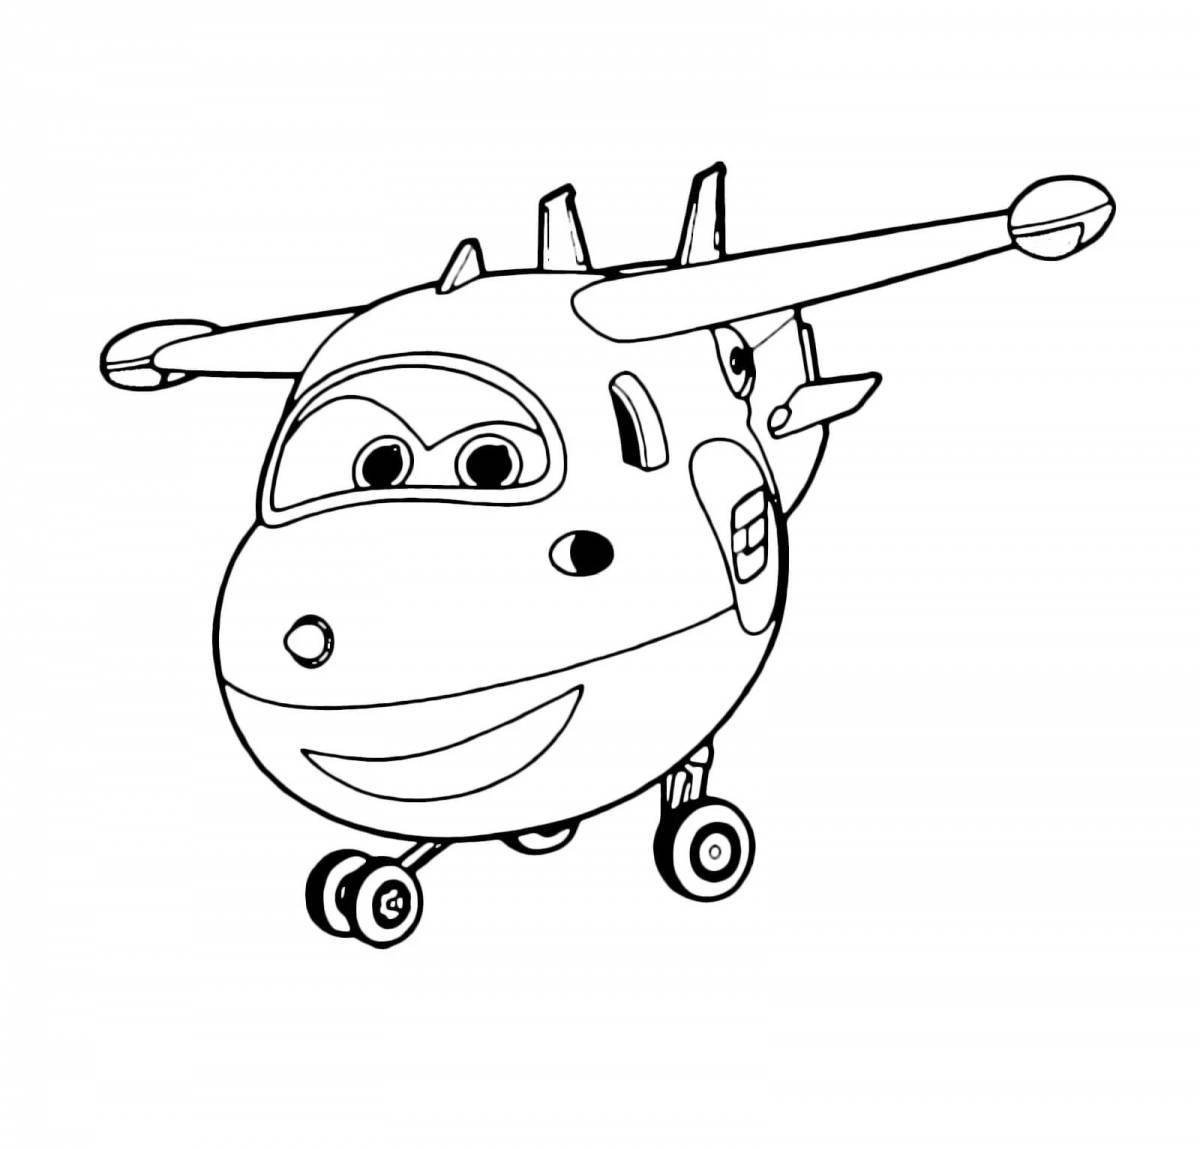 Colorful superjet coloring page